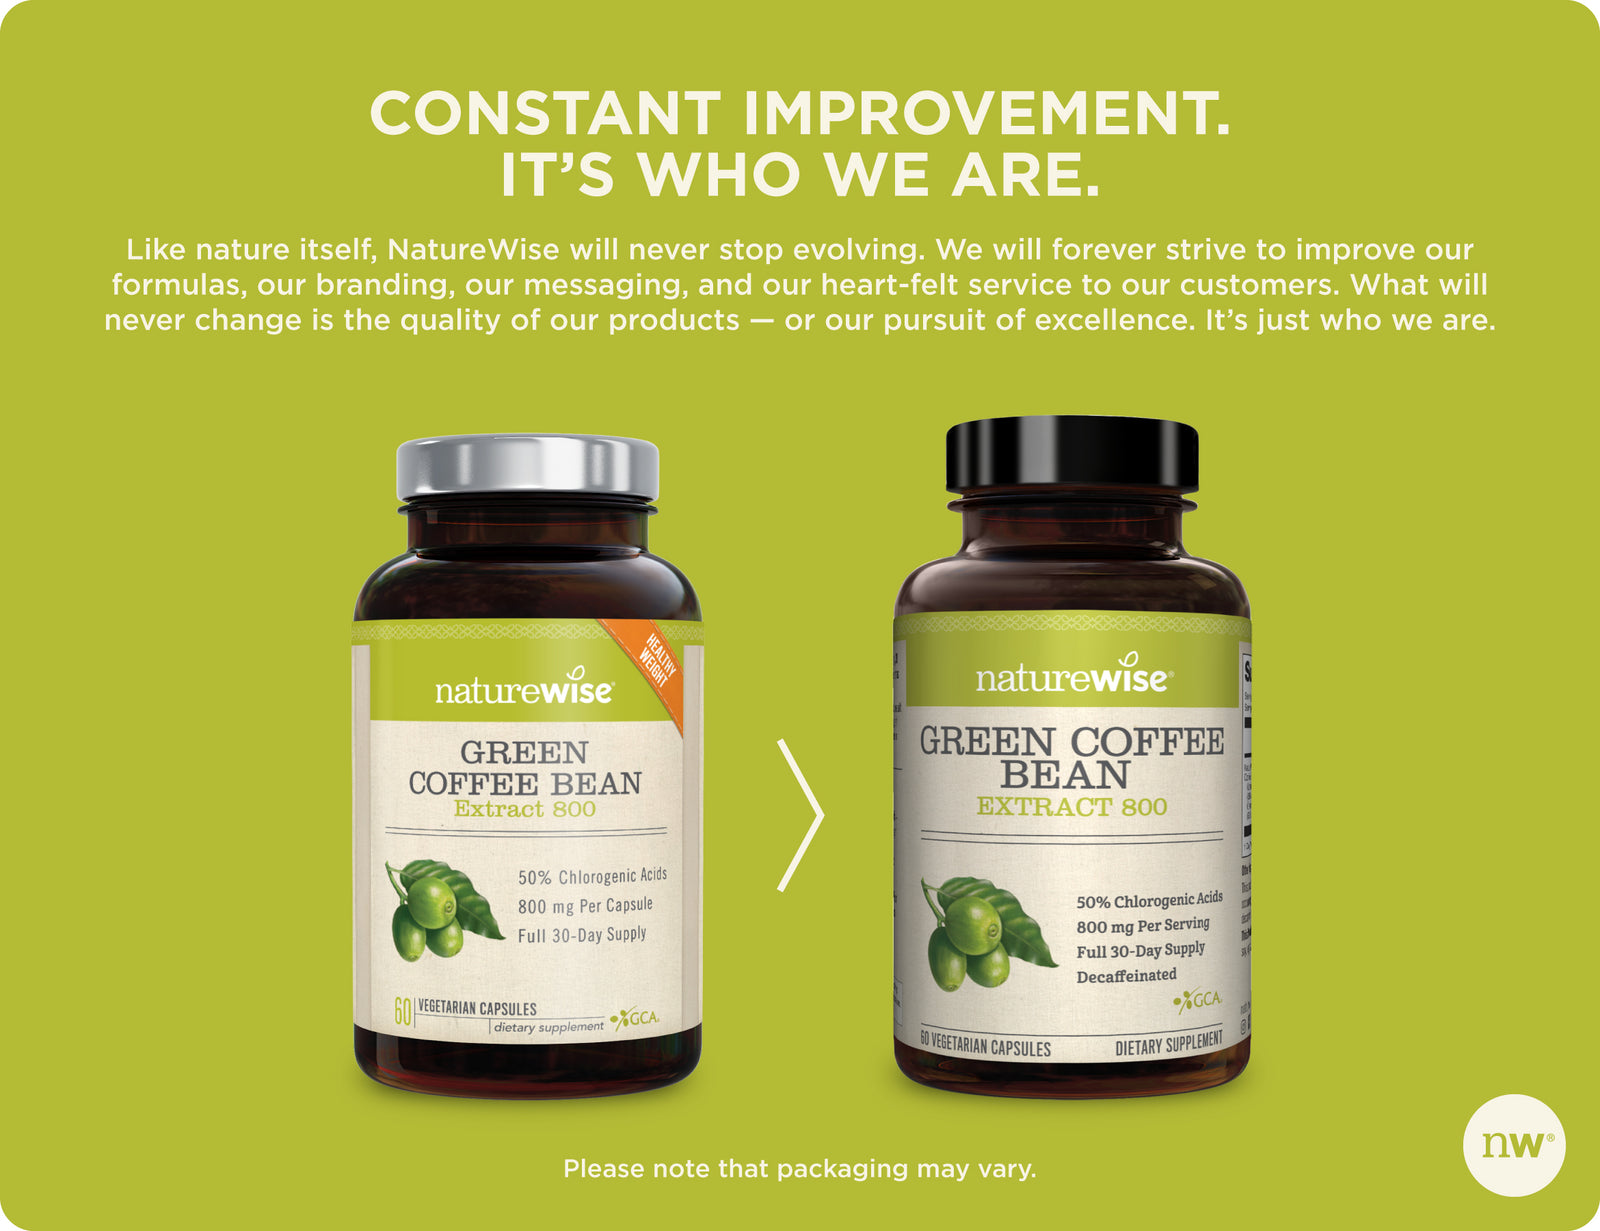 Green Coffee Bean Extract variation 